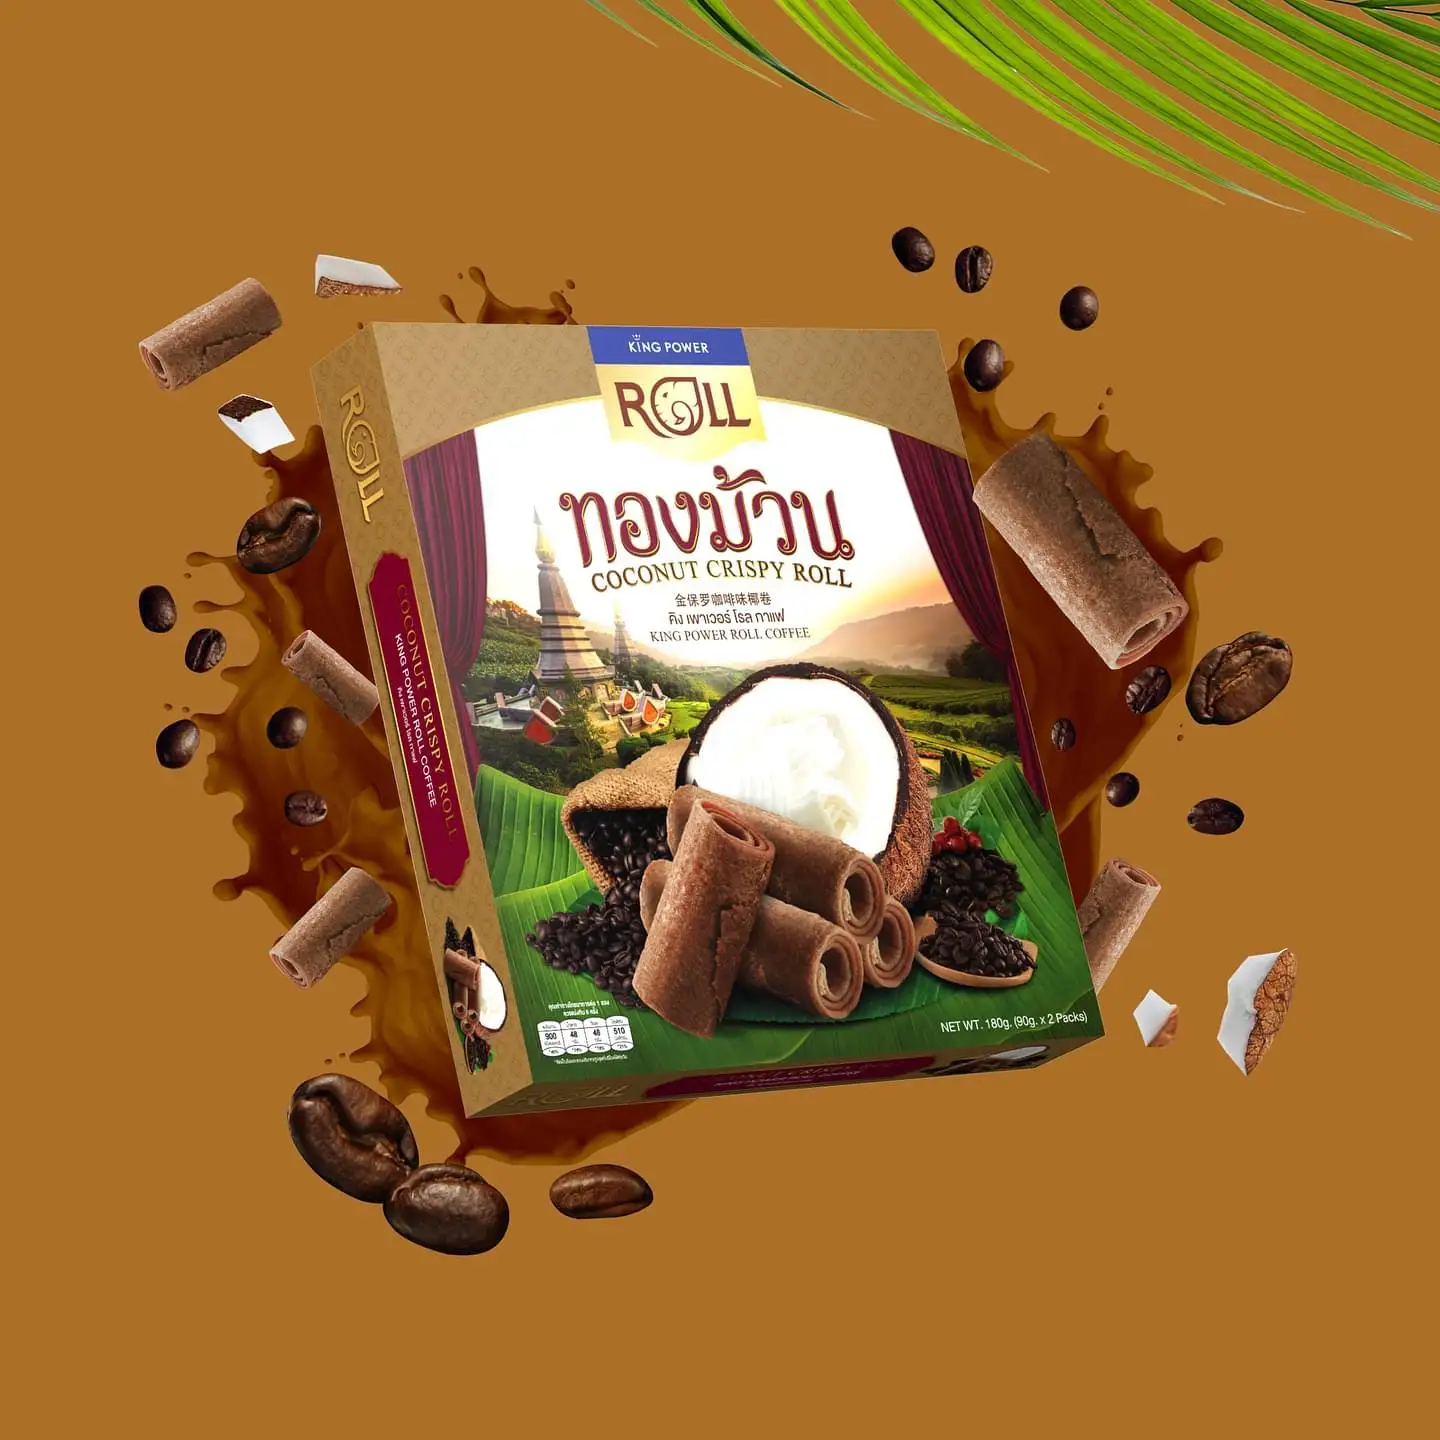 KING POWER ROLL Coffee Crispy Rolls THAI SNACK FOR EVERYONE TO ENJOY WITH DELICIOUS TASTE